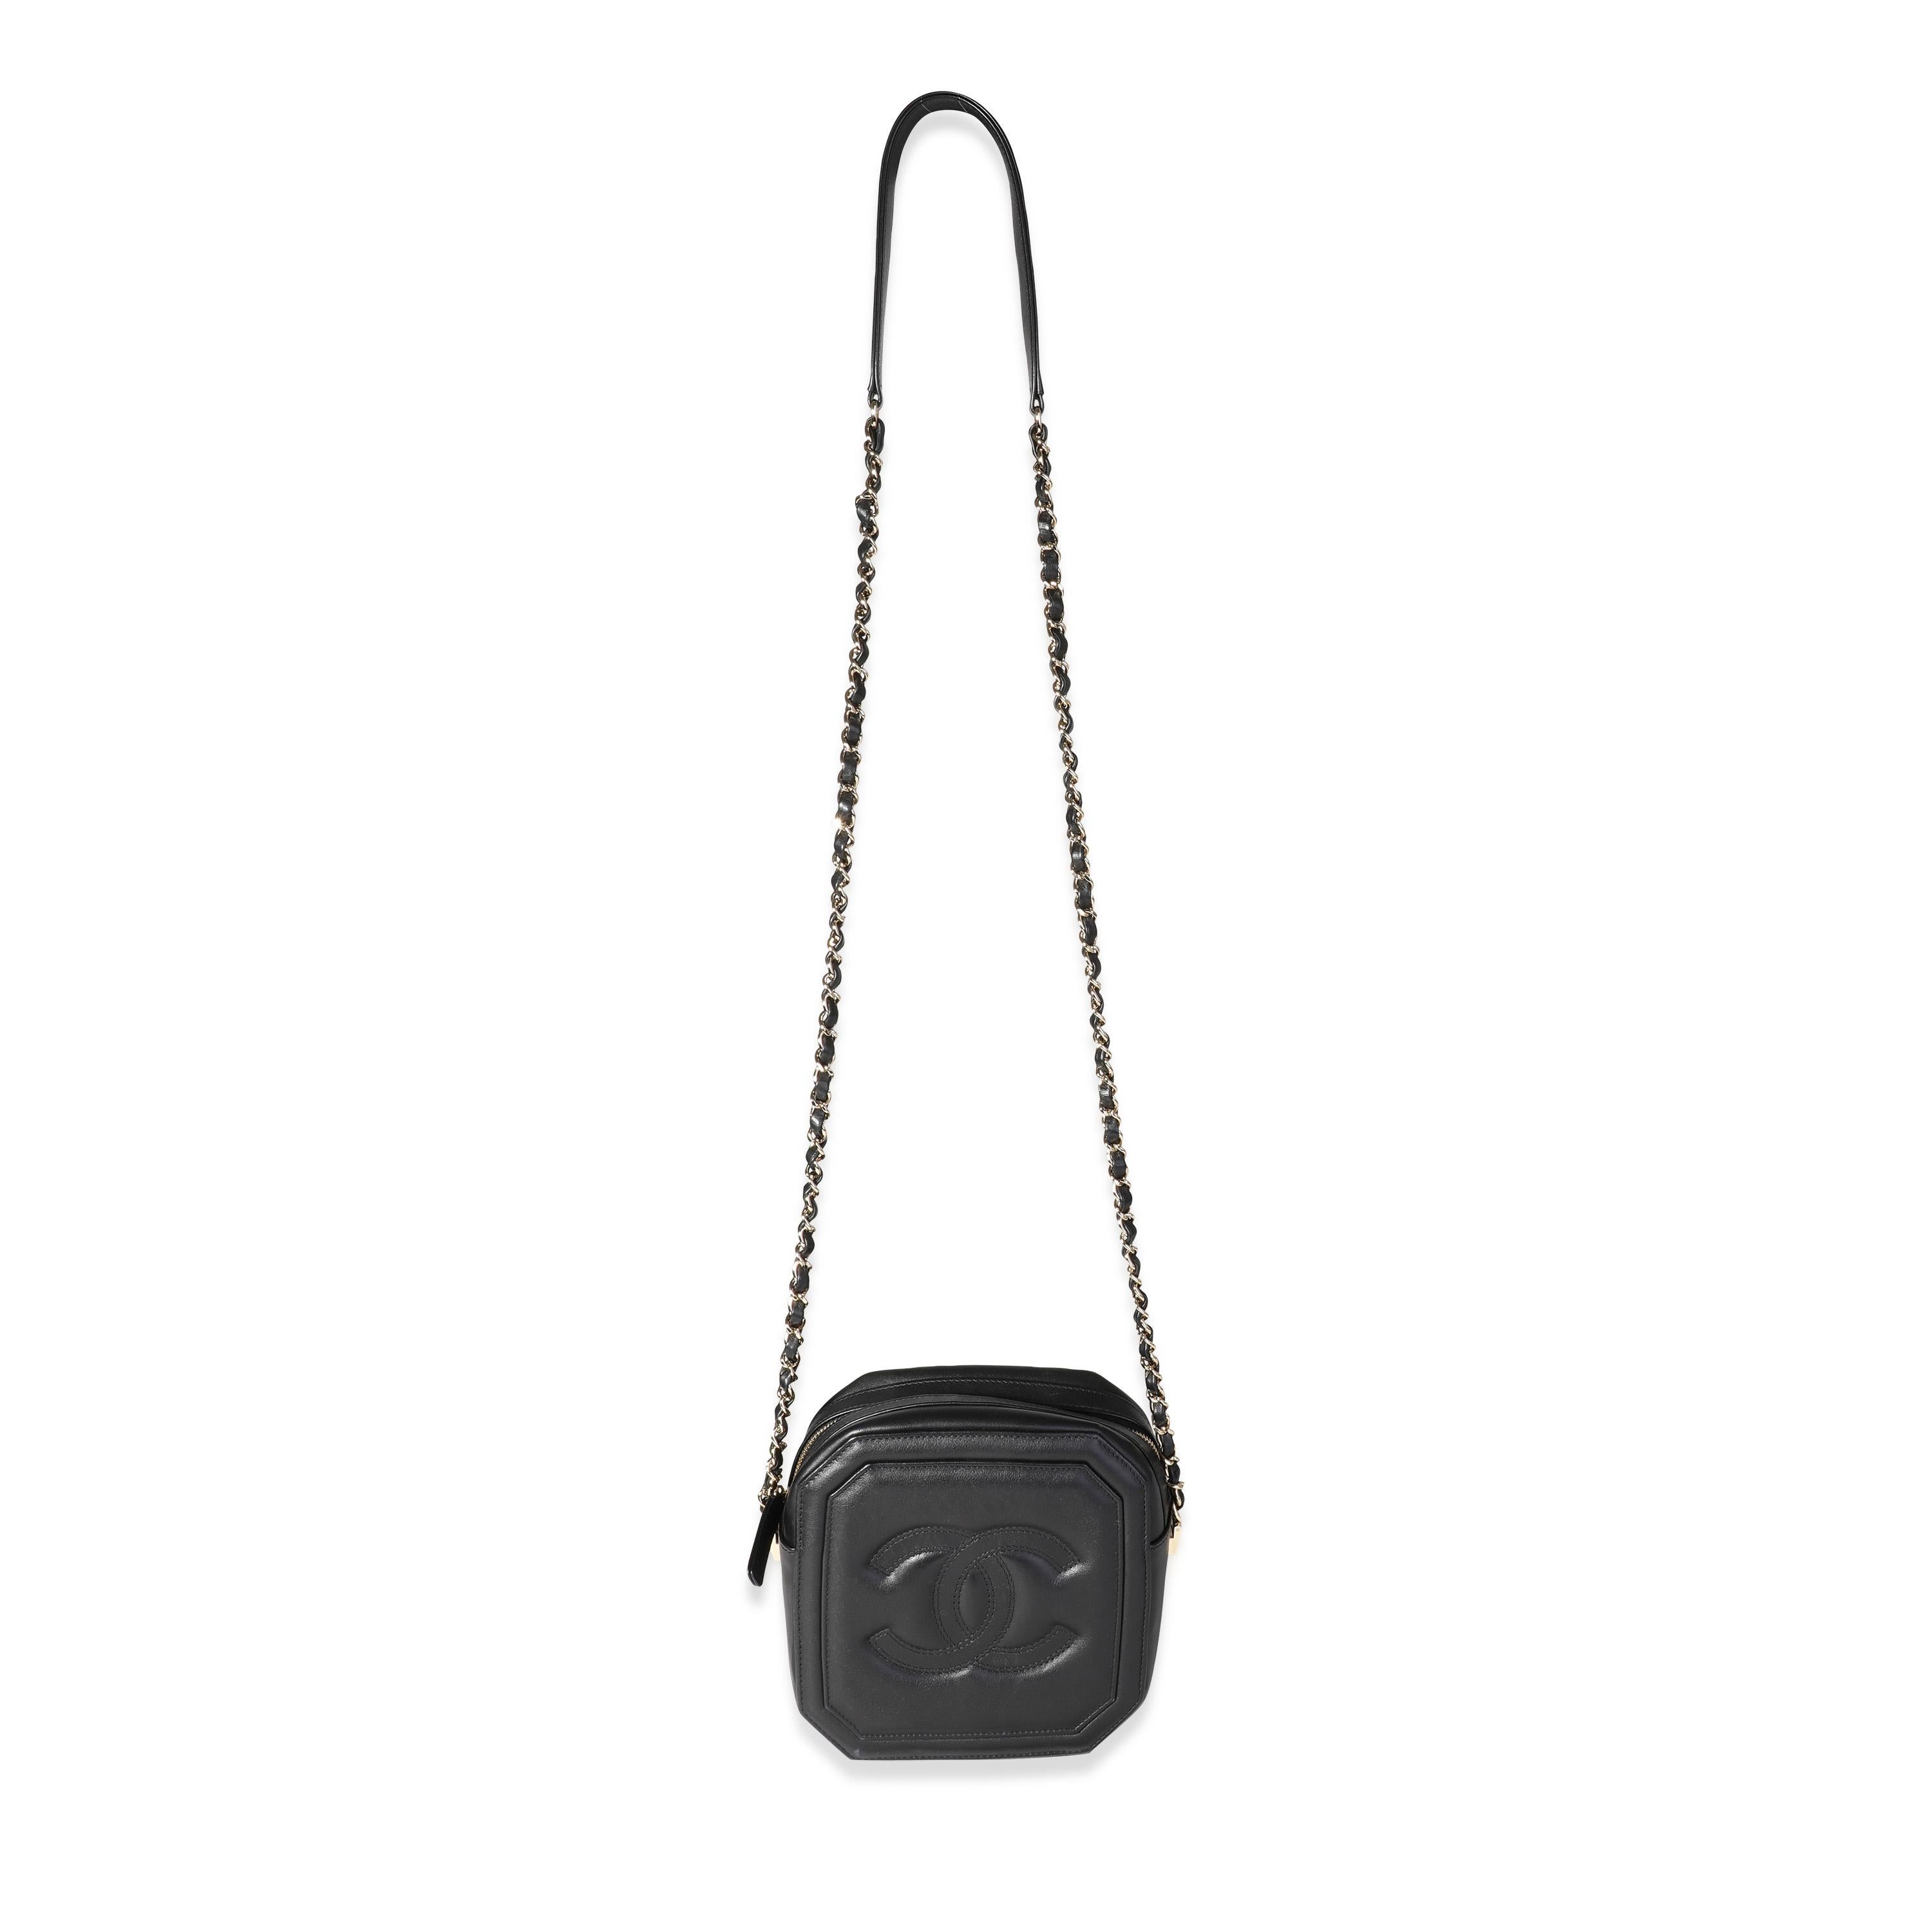 Listing Title: Chanel Black Lambskin Octagon Camera Bag
SKU: 117440
Condition: Pre-owned (3000)
Handbag Condition: Excellent
Condition Comments: Interior shows signs of use.
Brand: Chanel
Origin Country: France
Handbag Silhouette: Crossbody